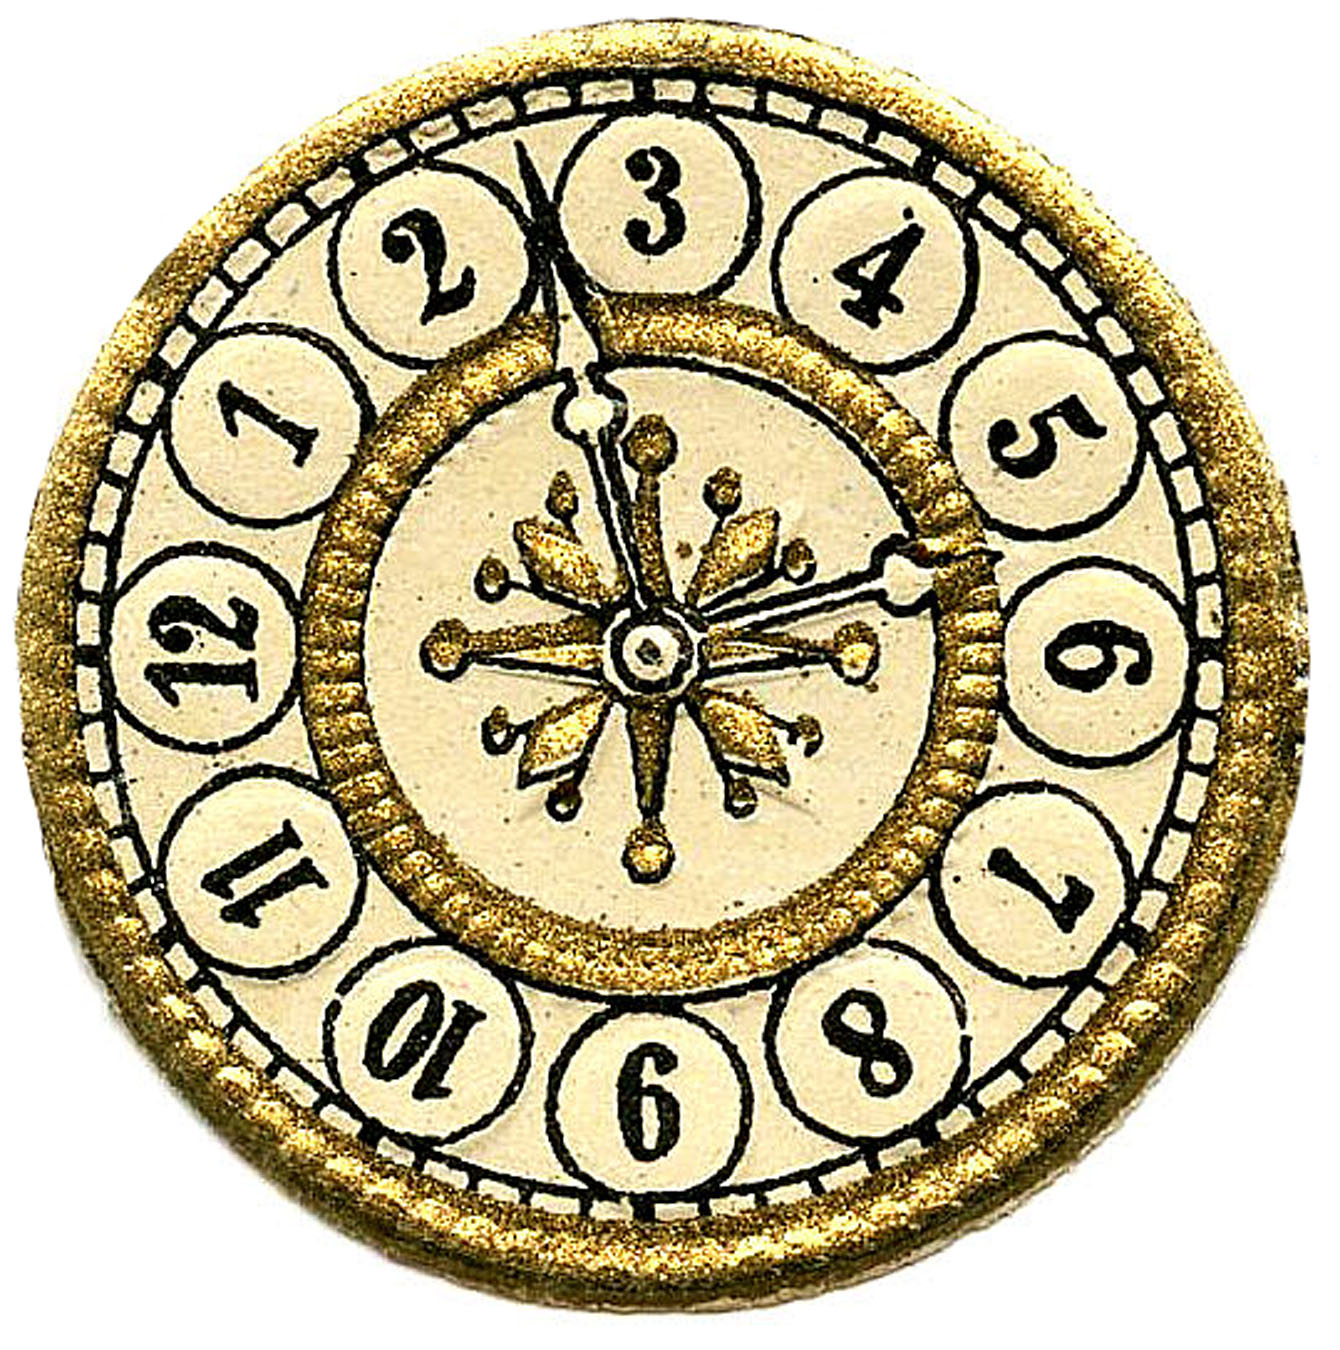 free clipart images clock face - photo #7